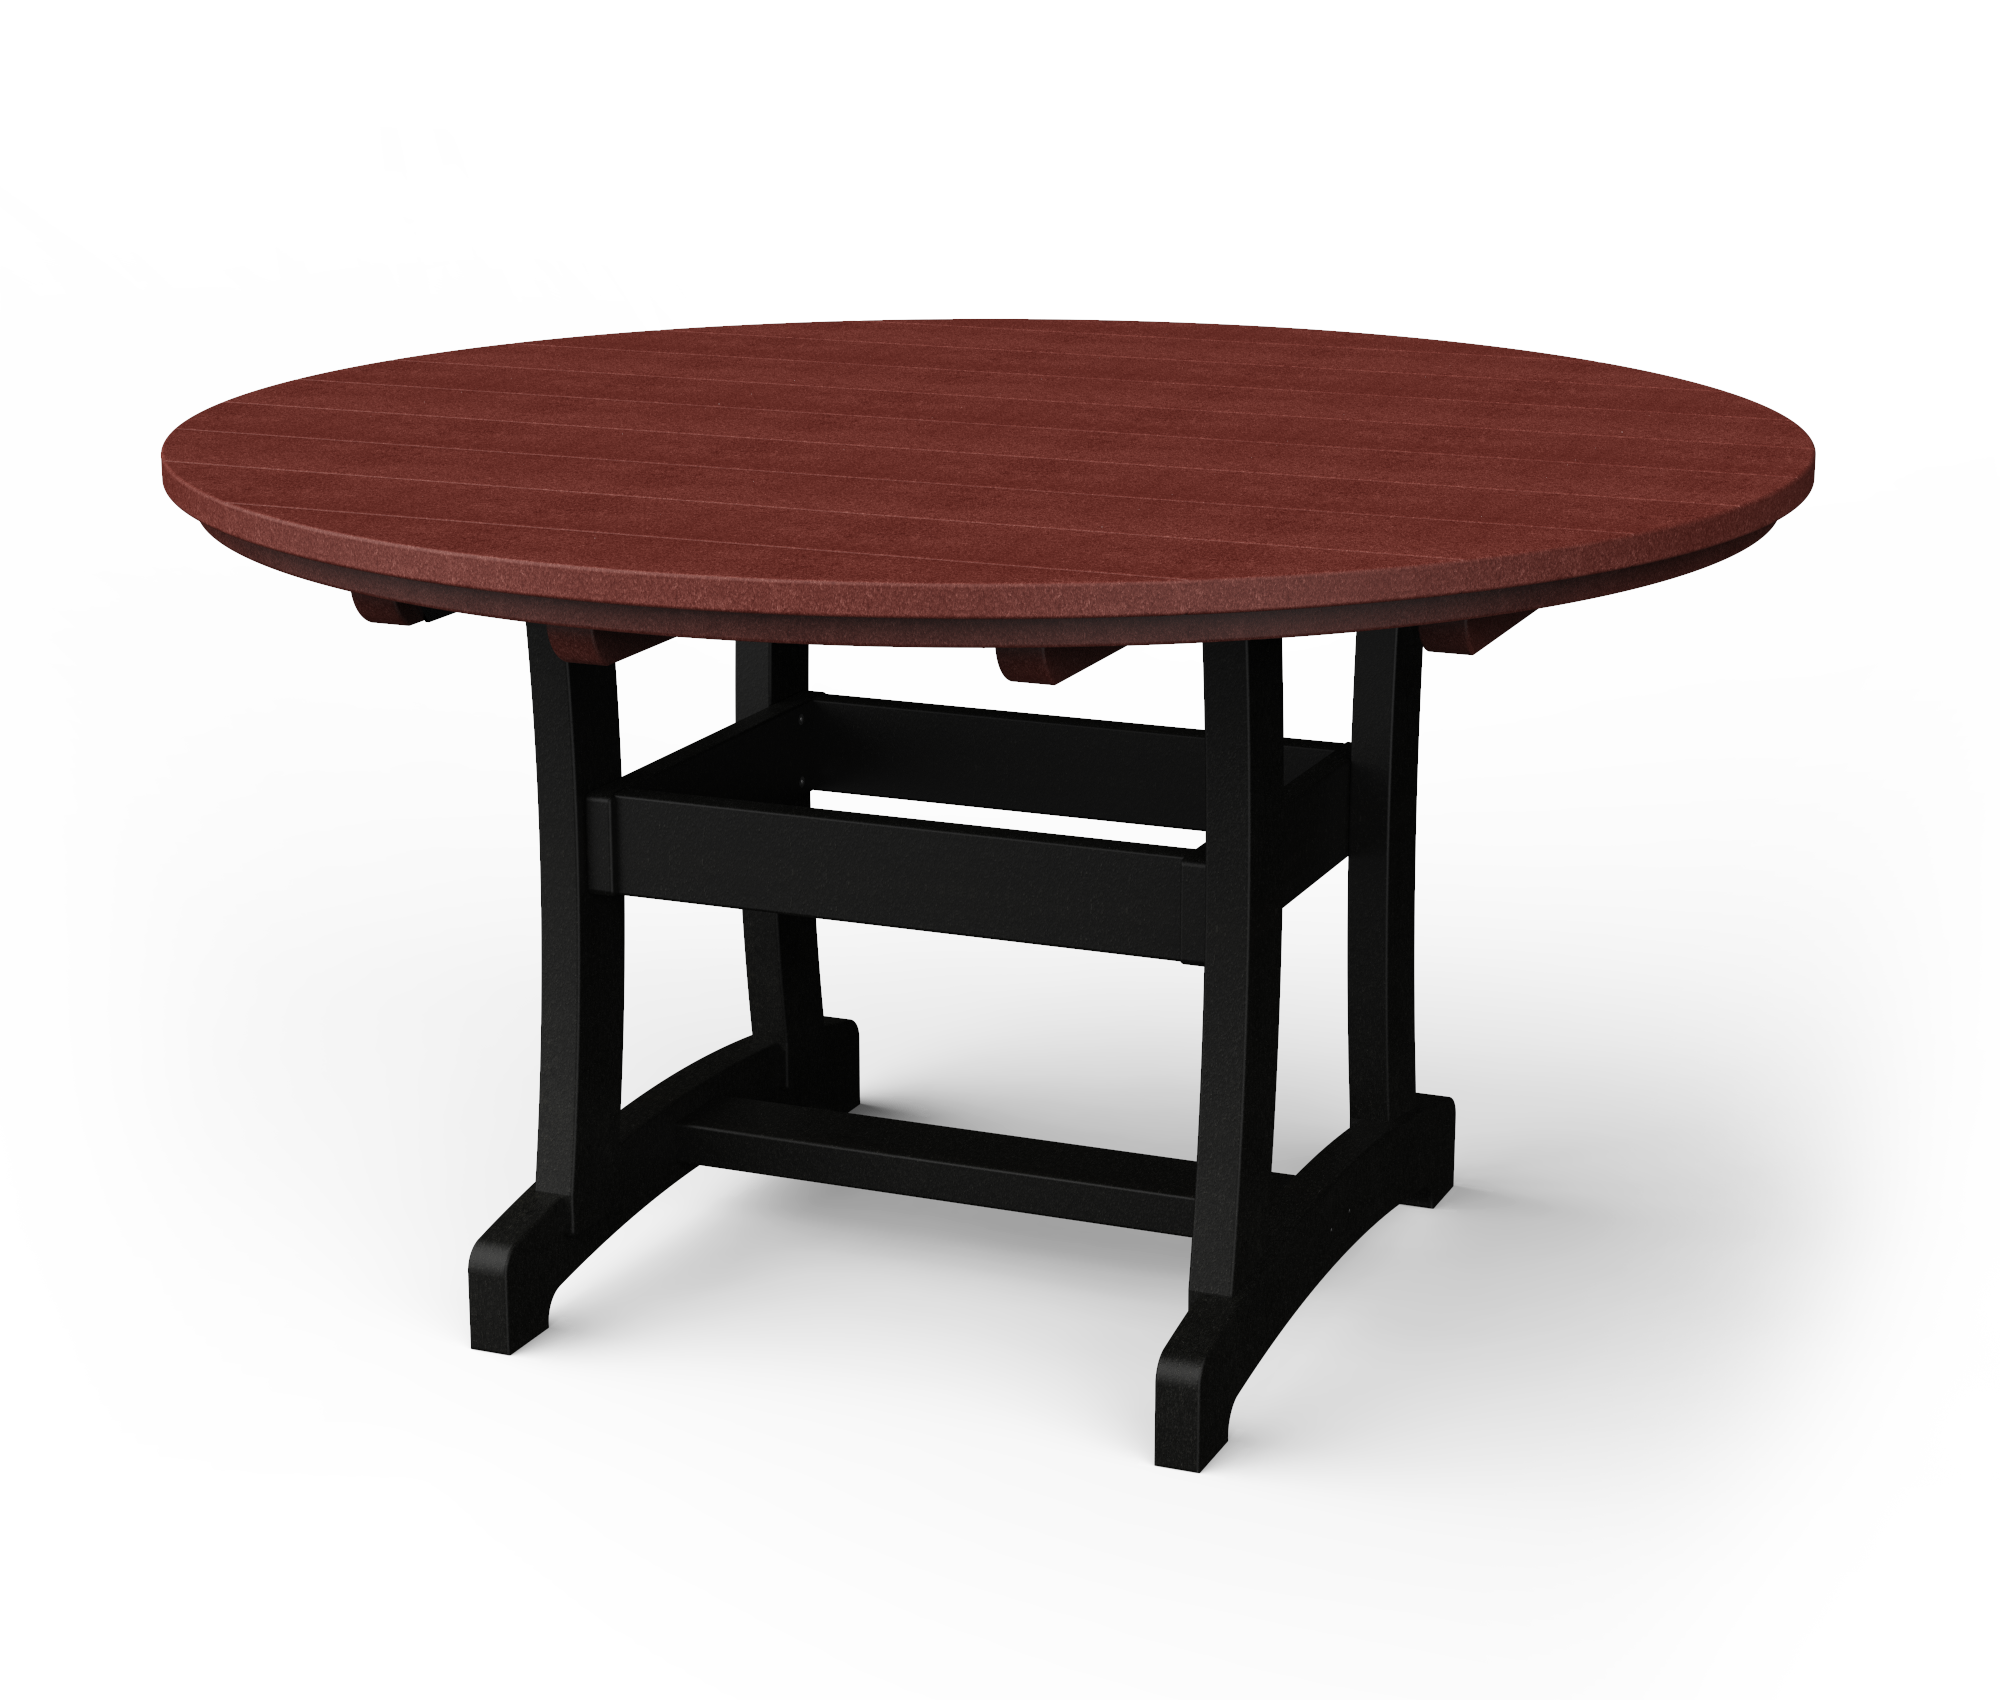 Poly round dining table.